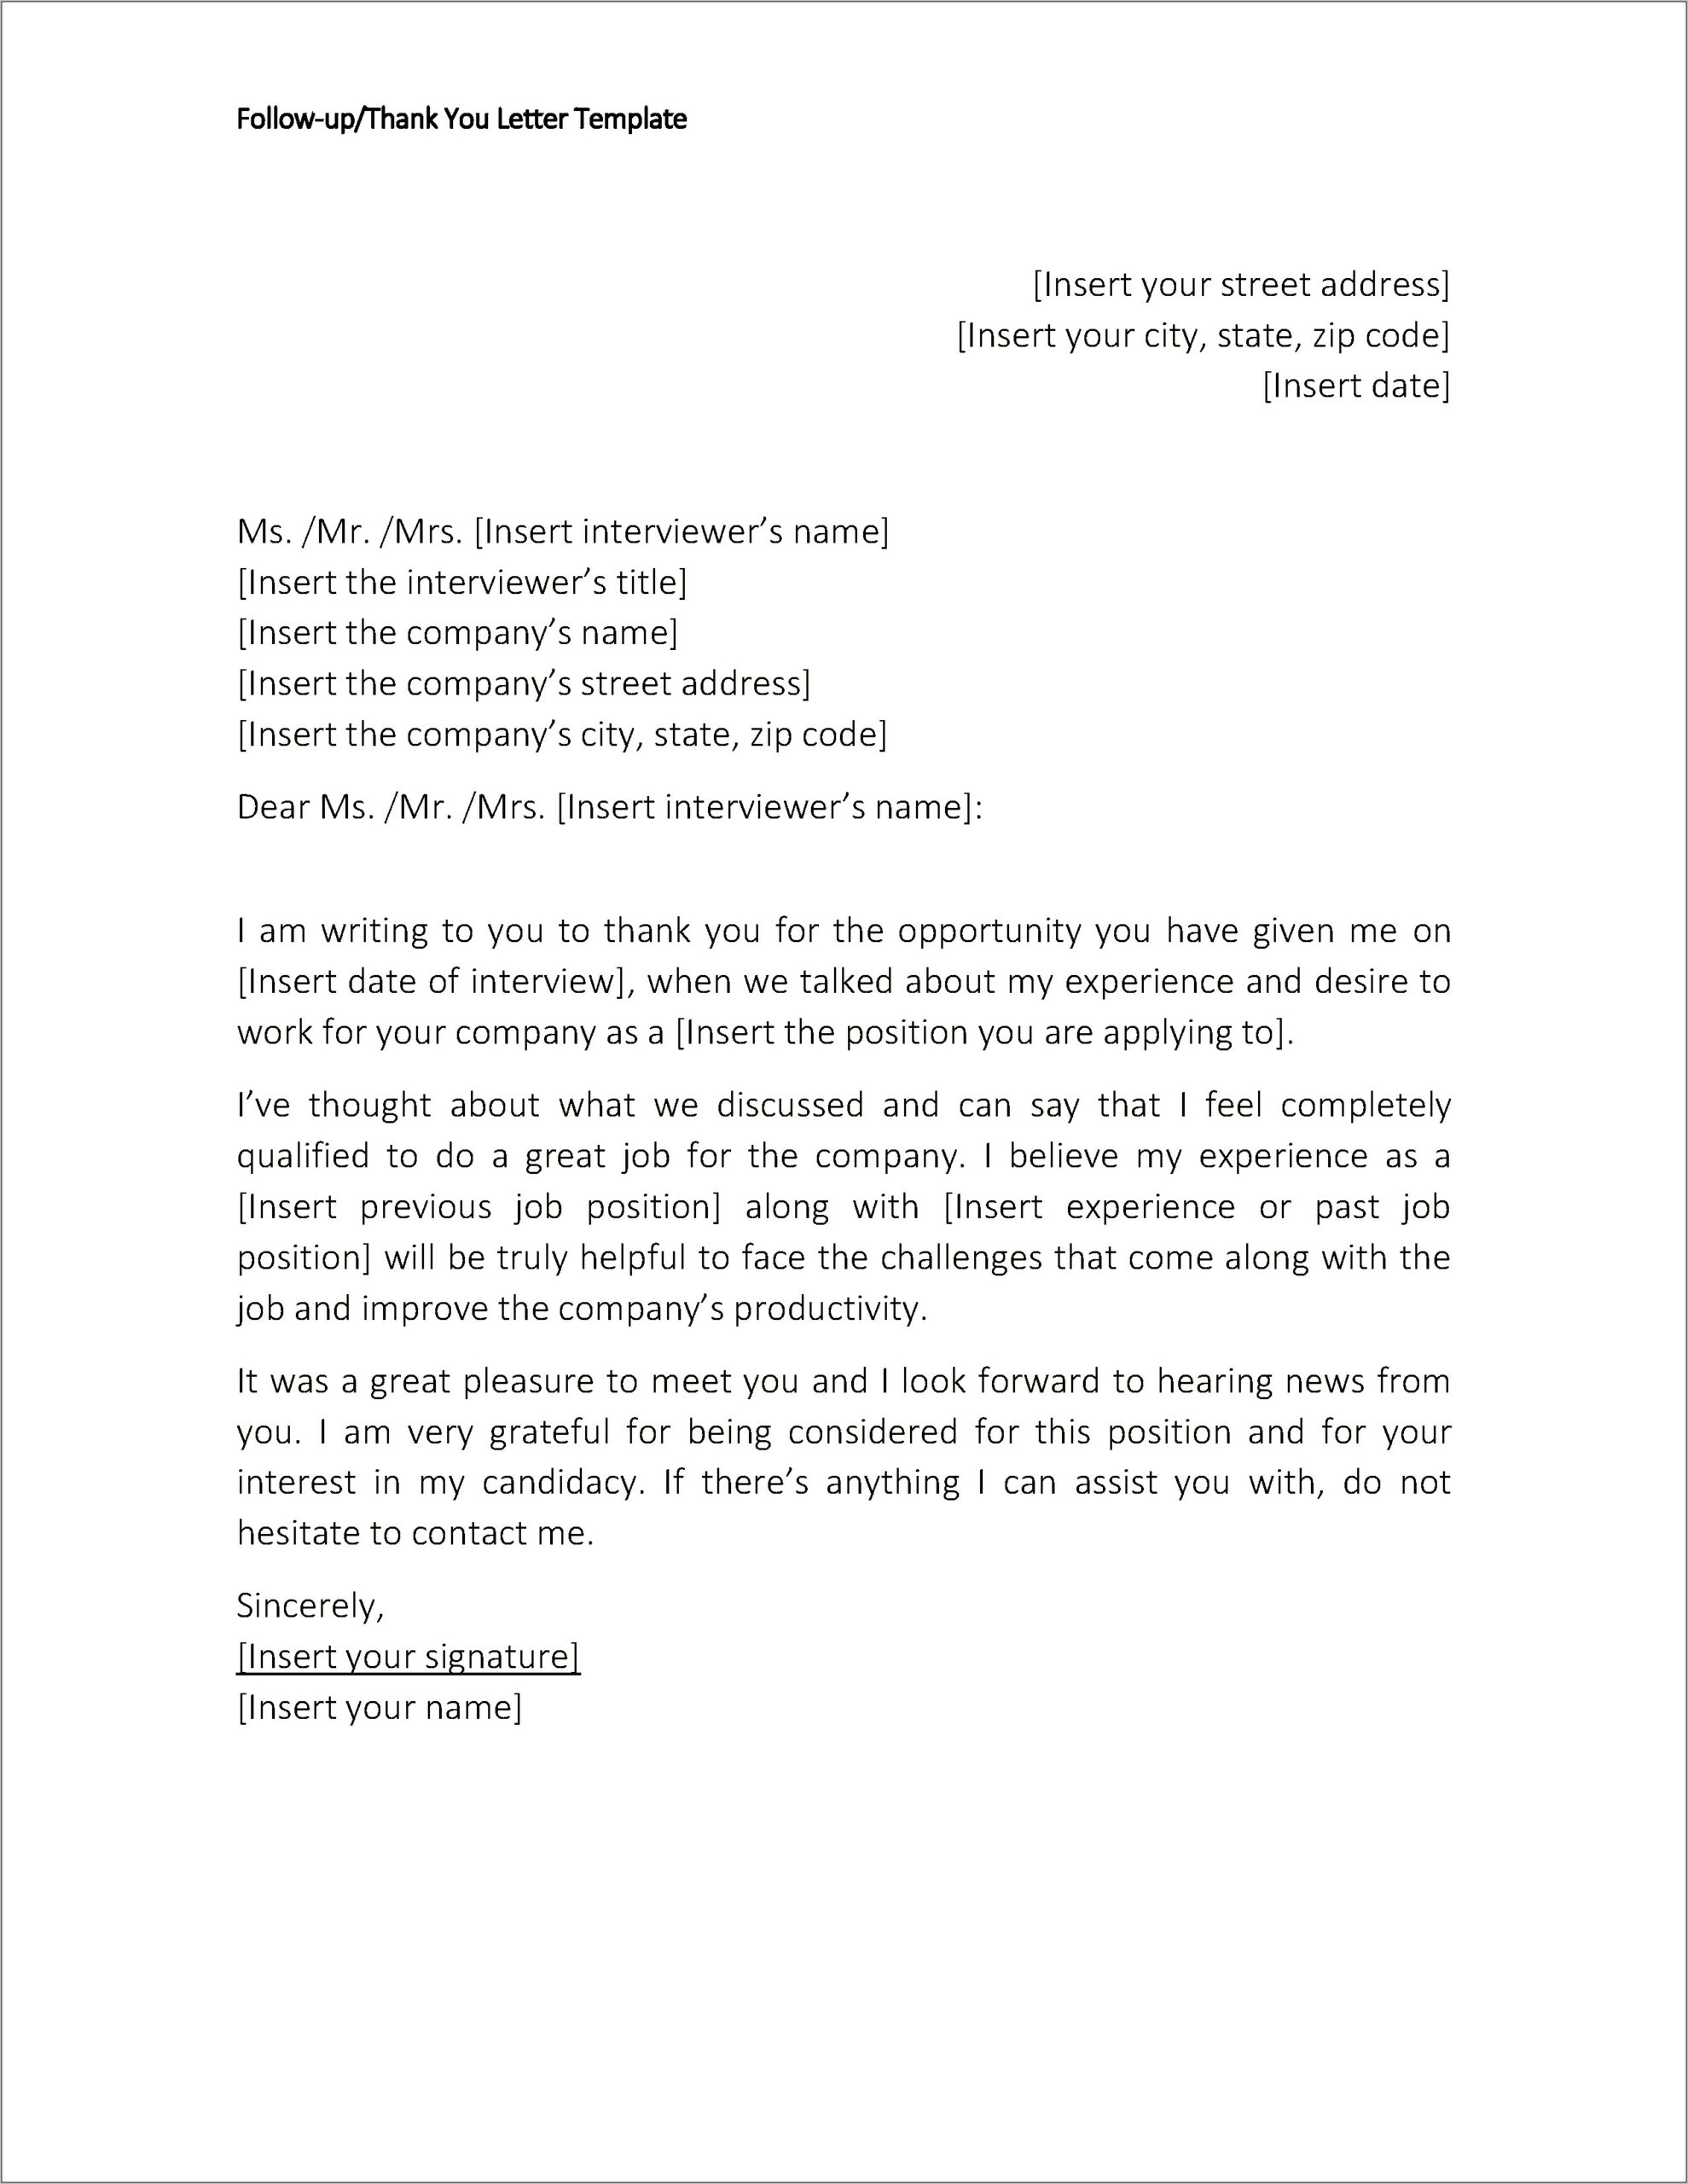 Follow Up Letter After Submitting A Resume Sample